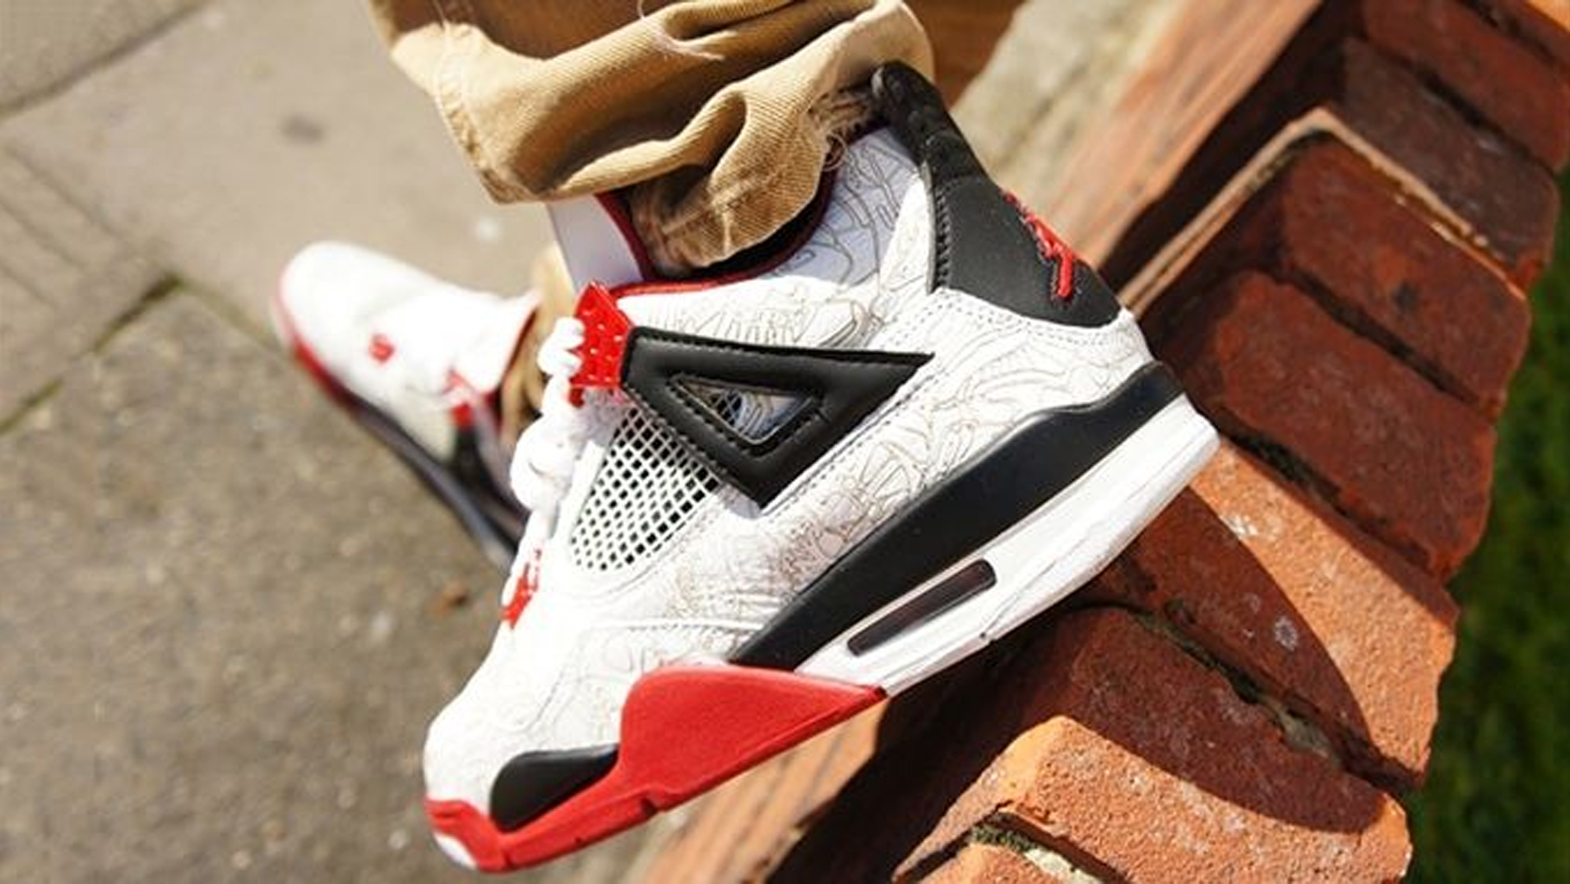 The Complete List Of The Top 10 Jordans Of All Time